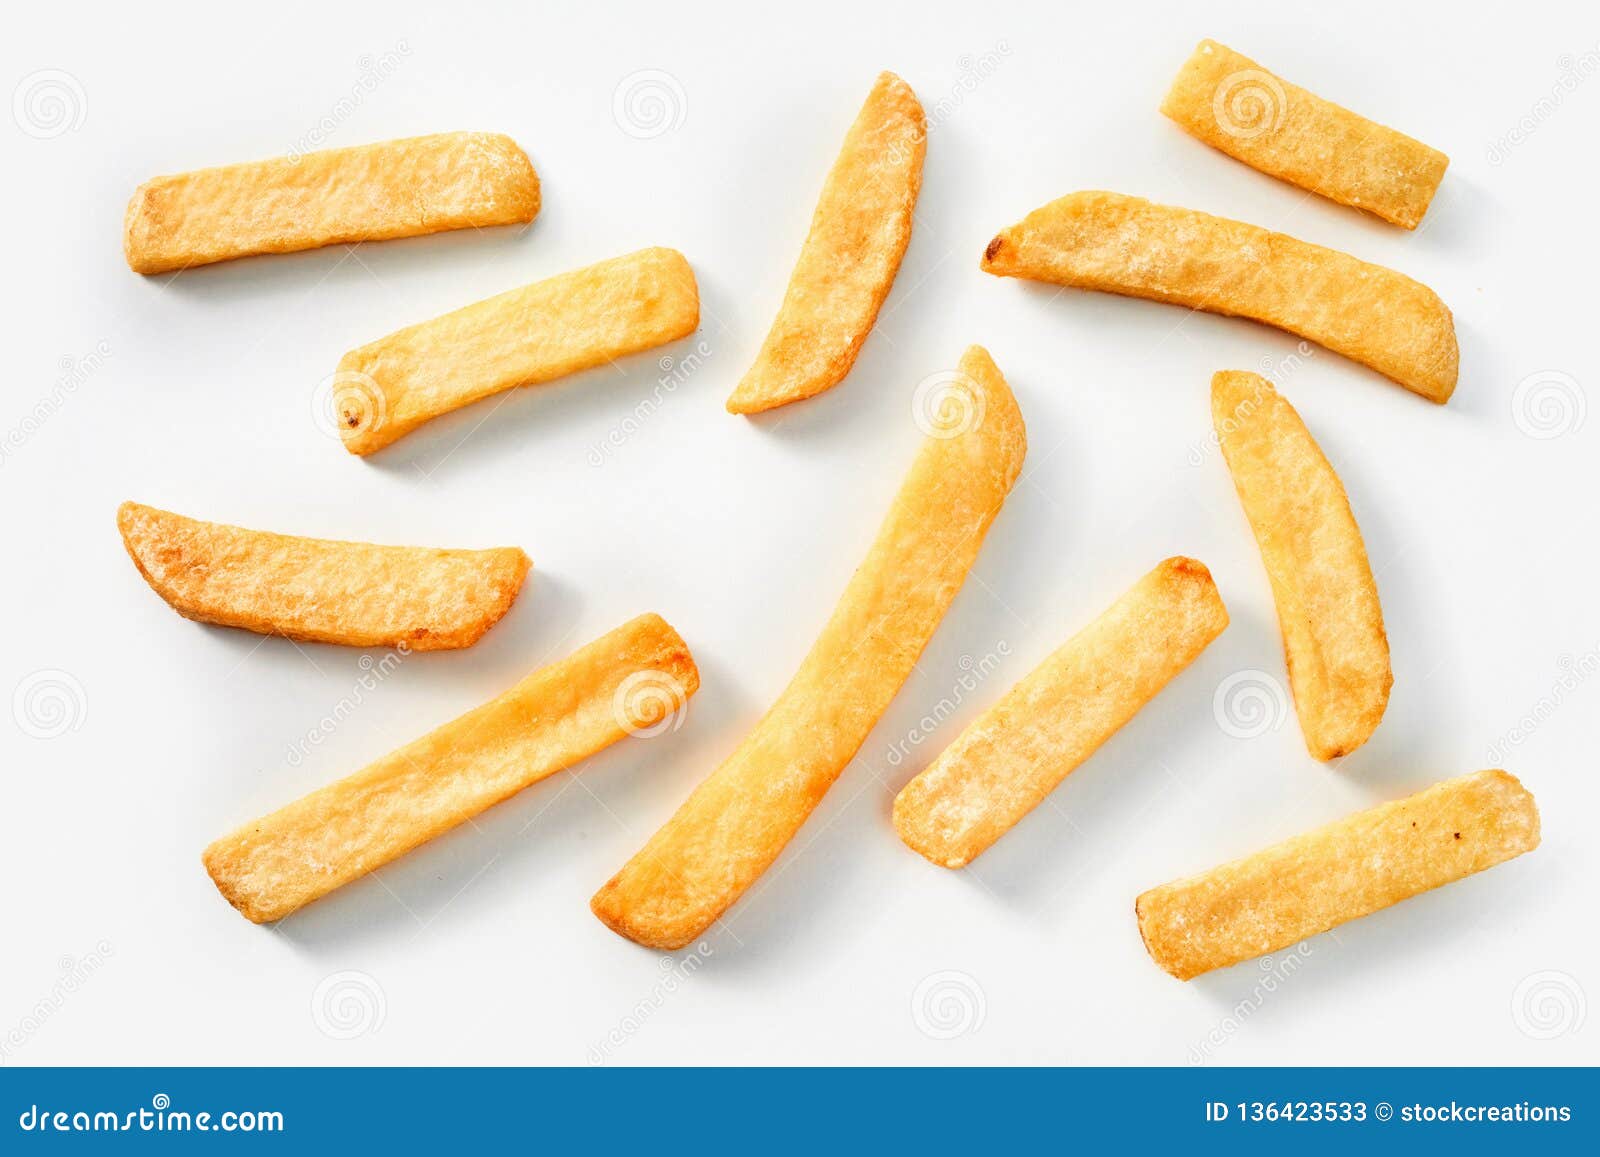 homemade french fries on a white background